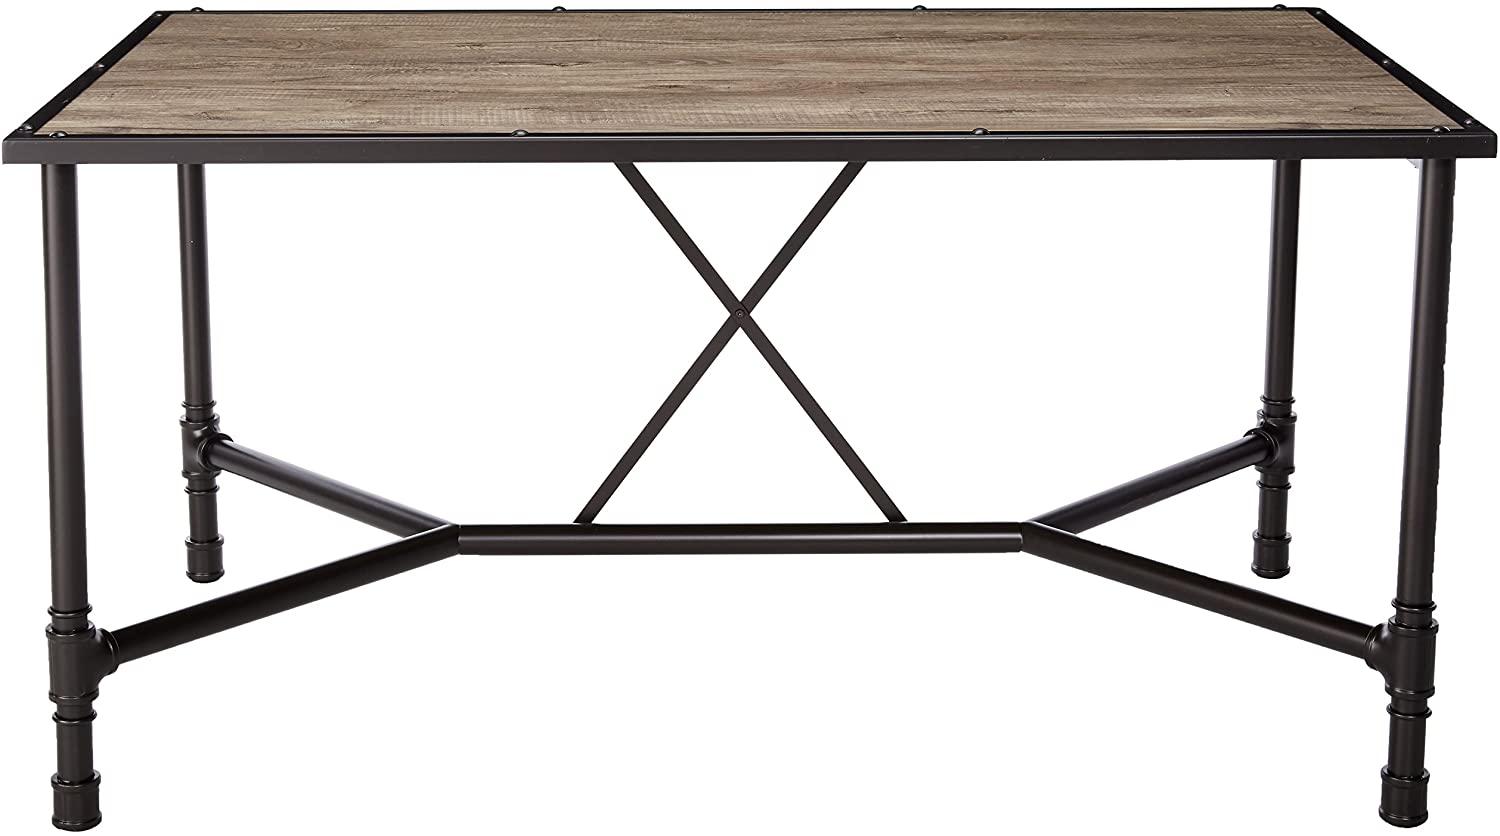 

    
Contemporary Rustic Oak & Black Dining Table by Acme Caitlin 72035
